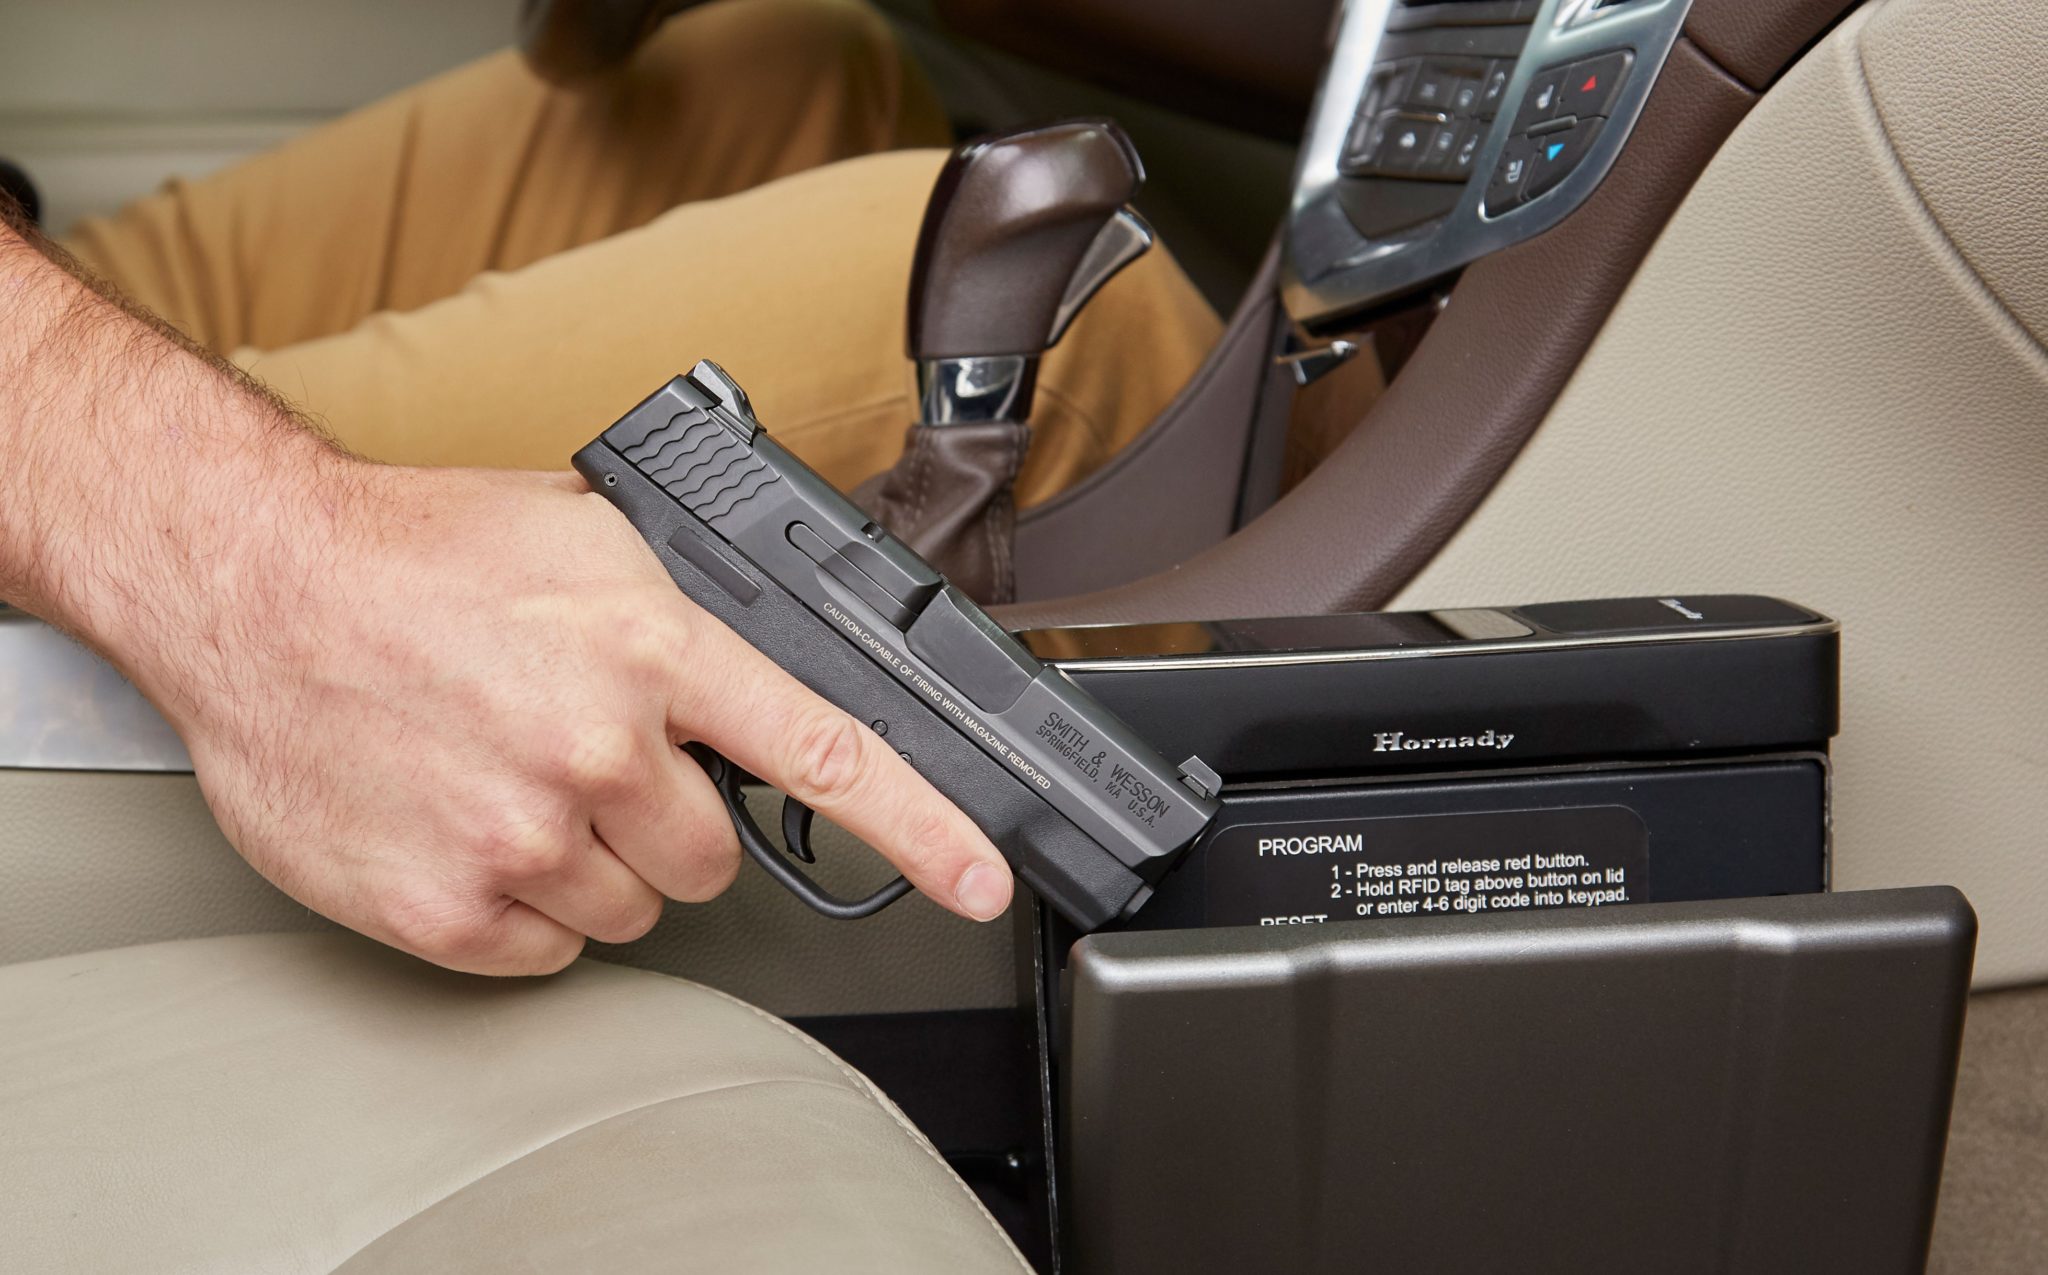 Hornady Rapid Vehicle Safe — Safe Secure With Rapid Handgun Access • Spotter Up 8528